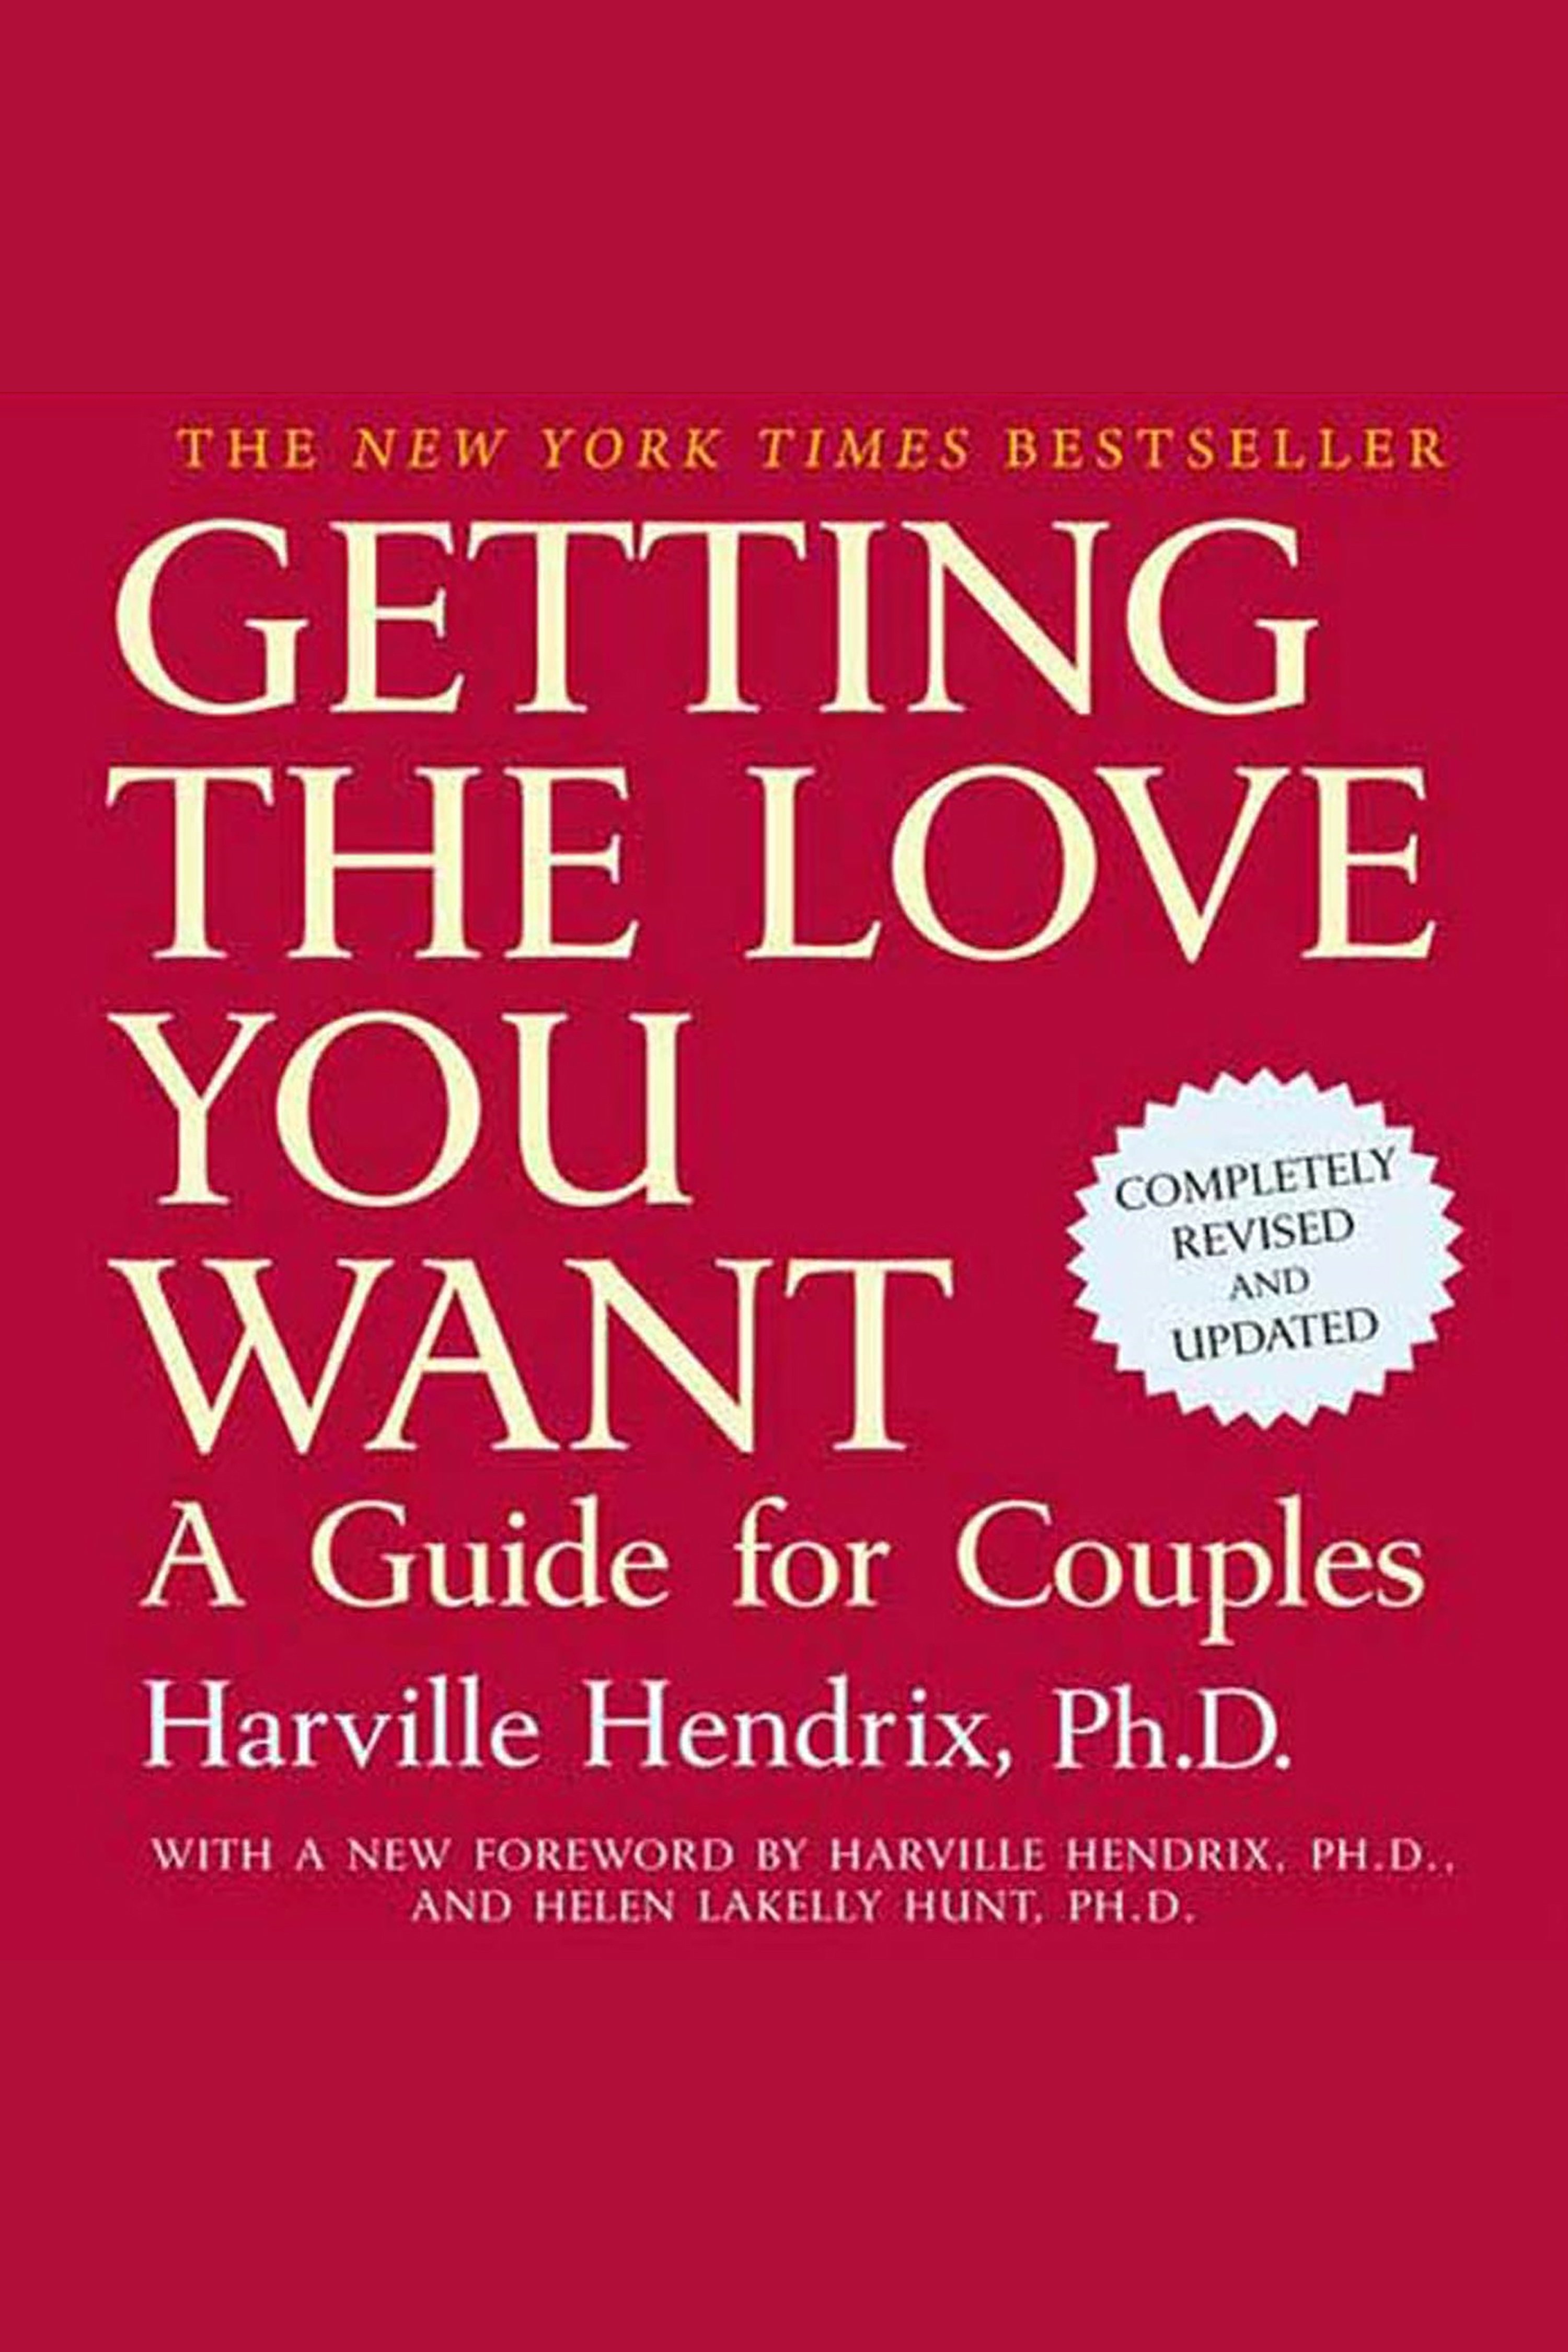 Getting the Love You Want A Guide for Couples, 20th Anniversary Edition